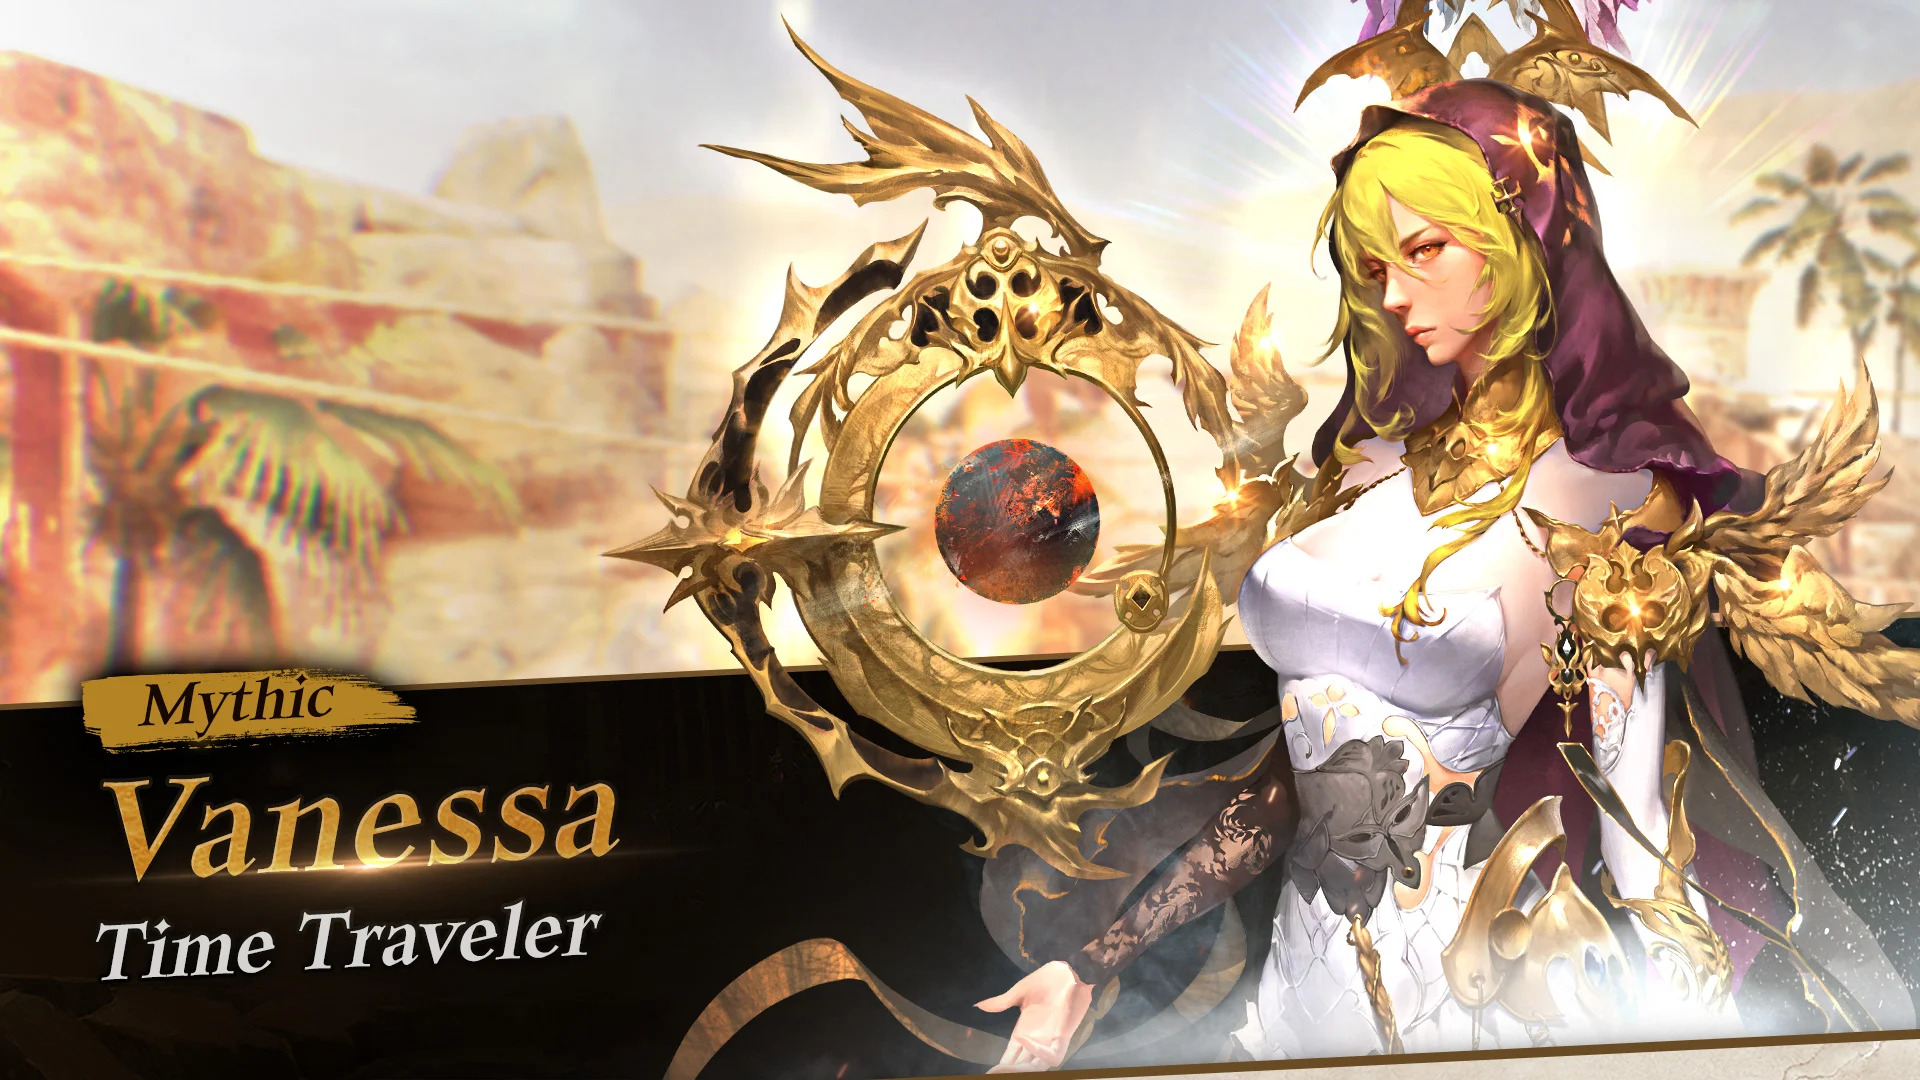 "New Hero Vanessa Joins Seven Knights 2 in Exciting Update!"